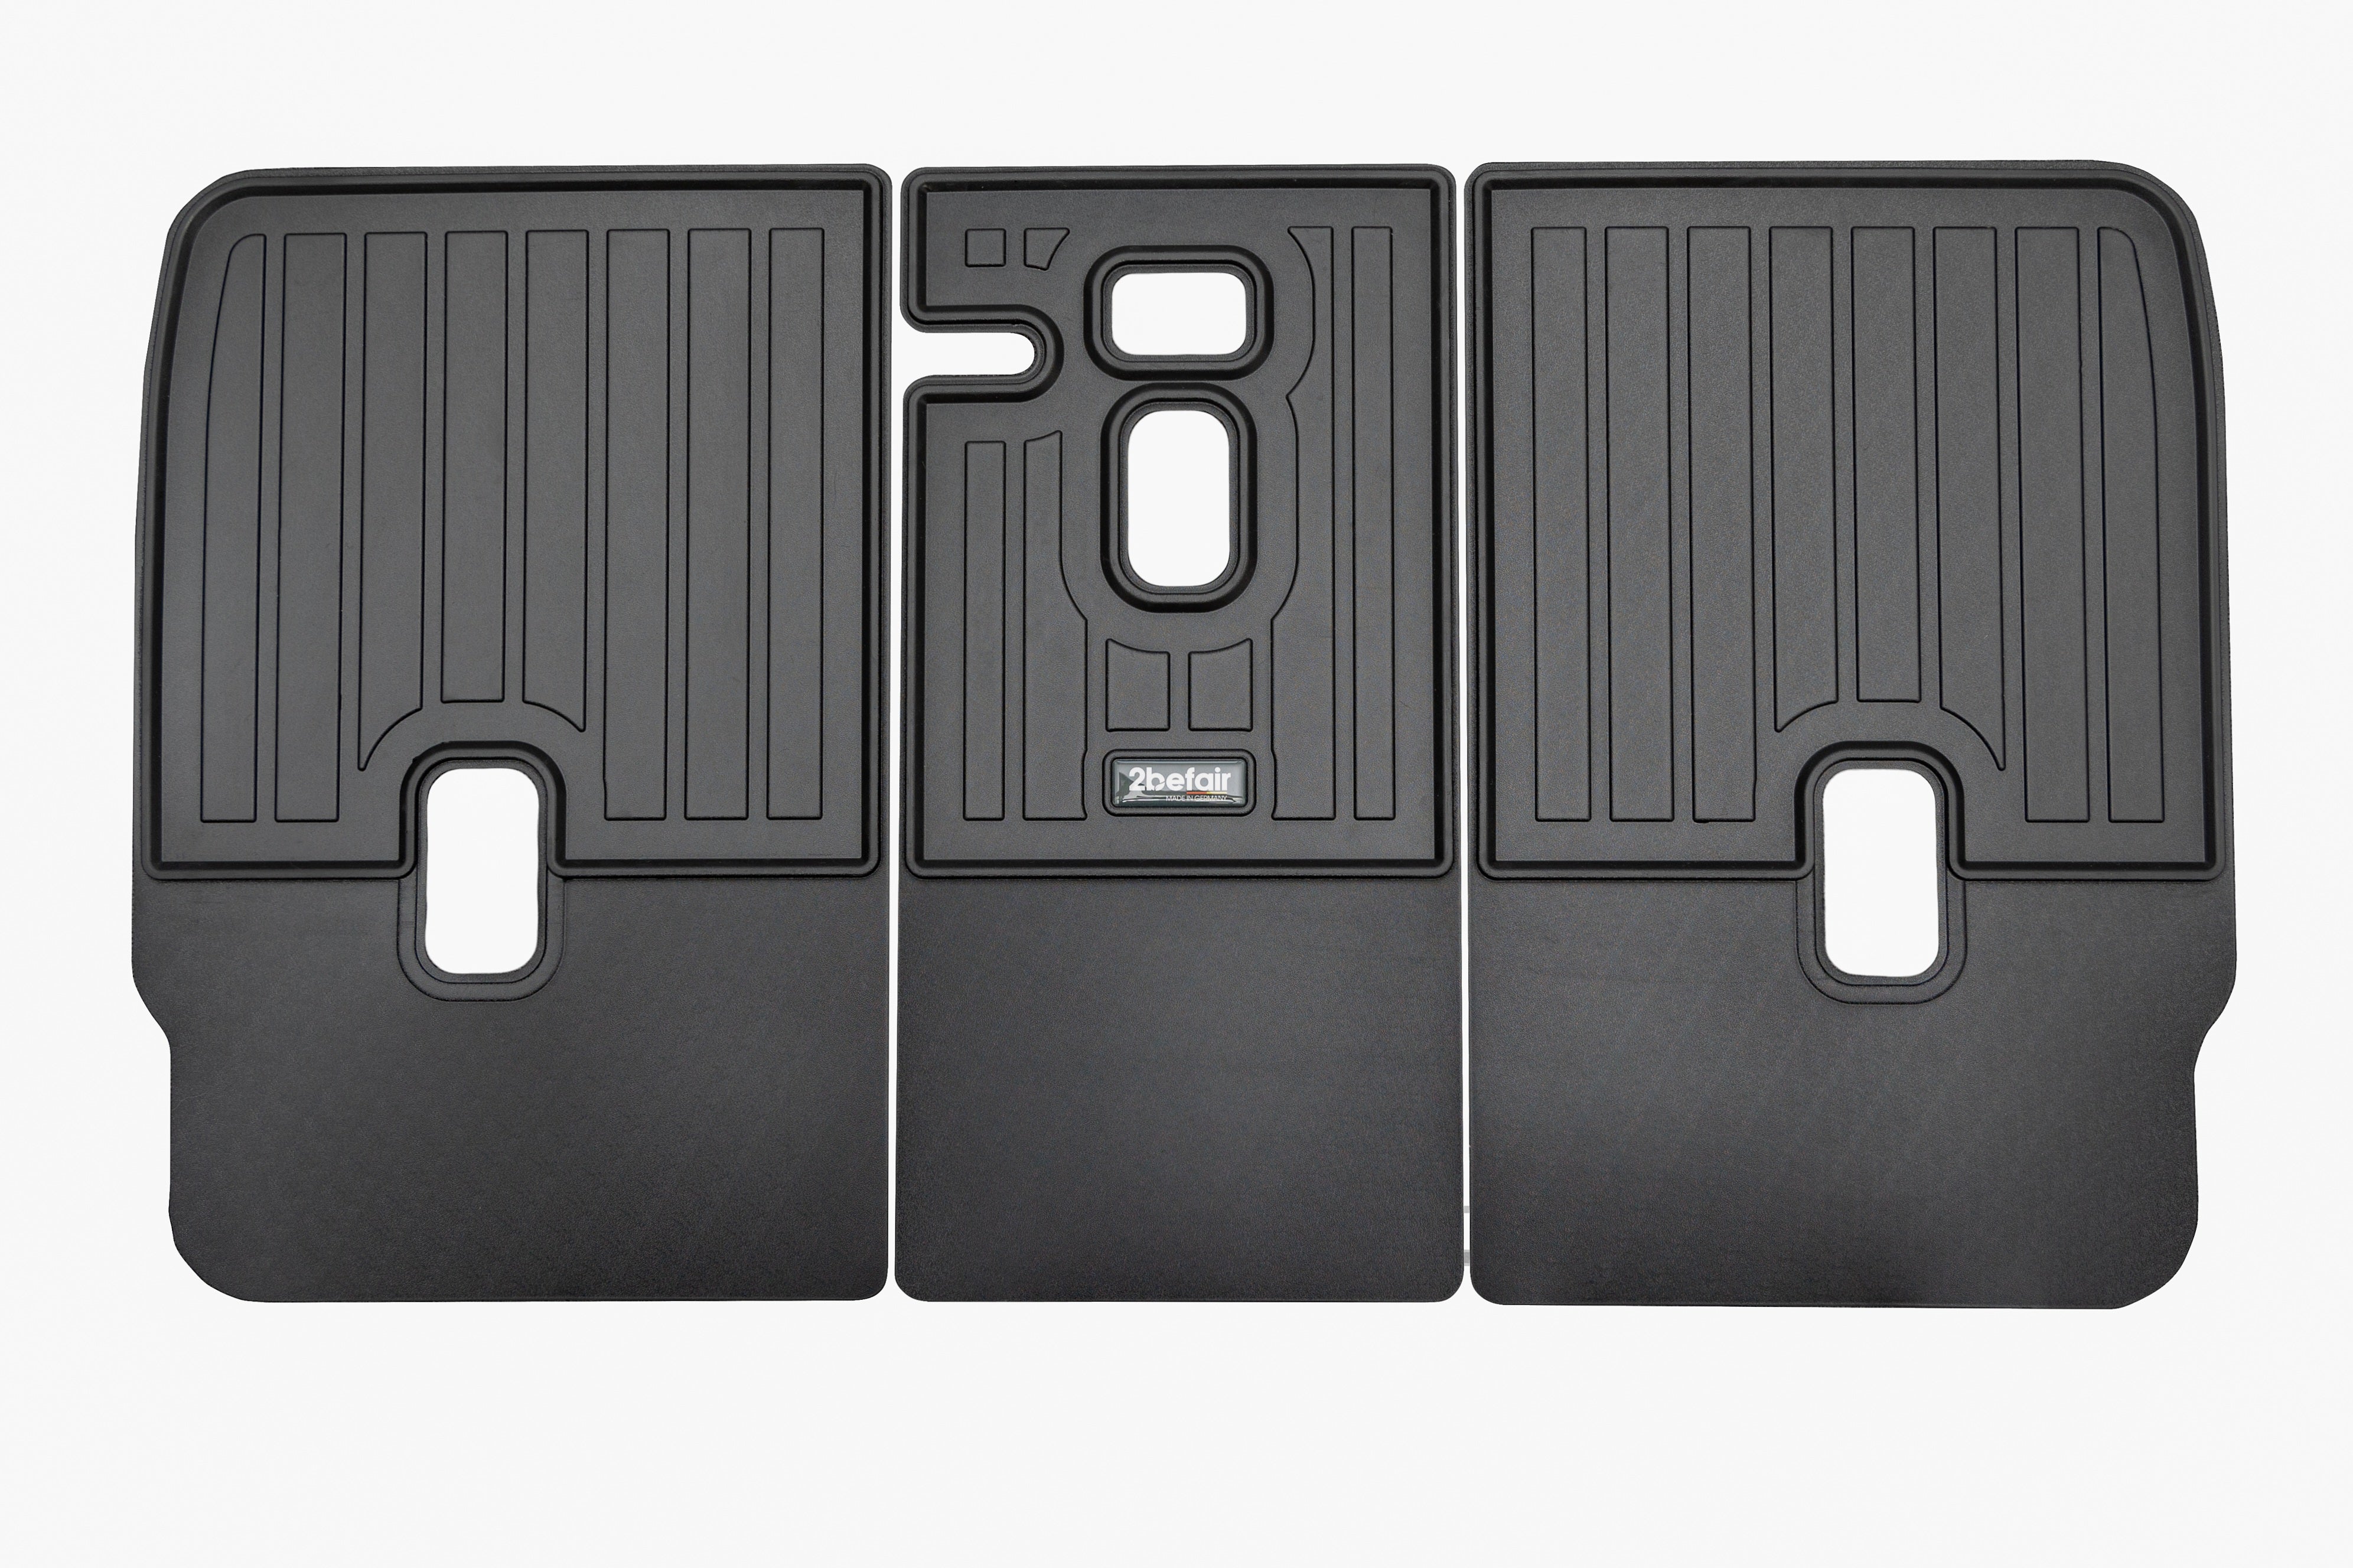 2befair protective mats for the back of the Tesla rear seats Model Y